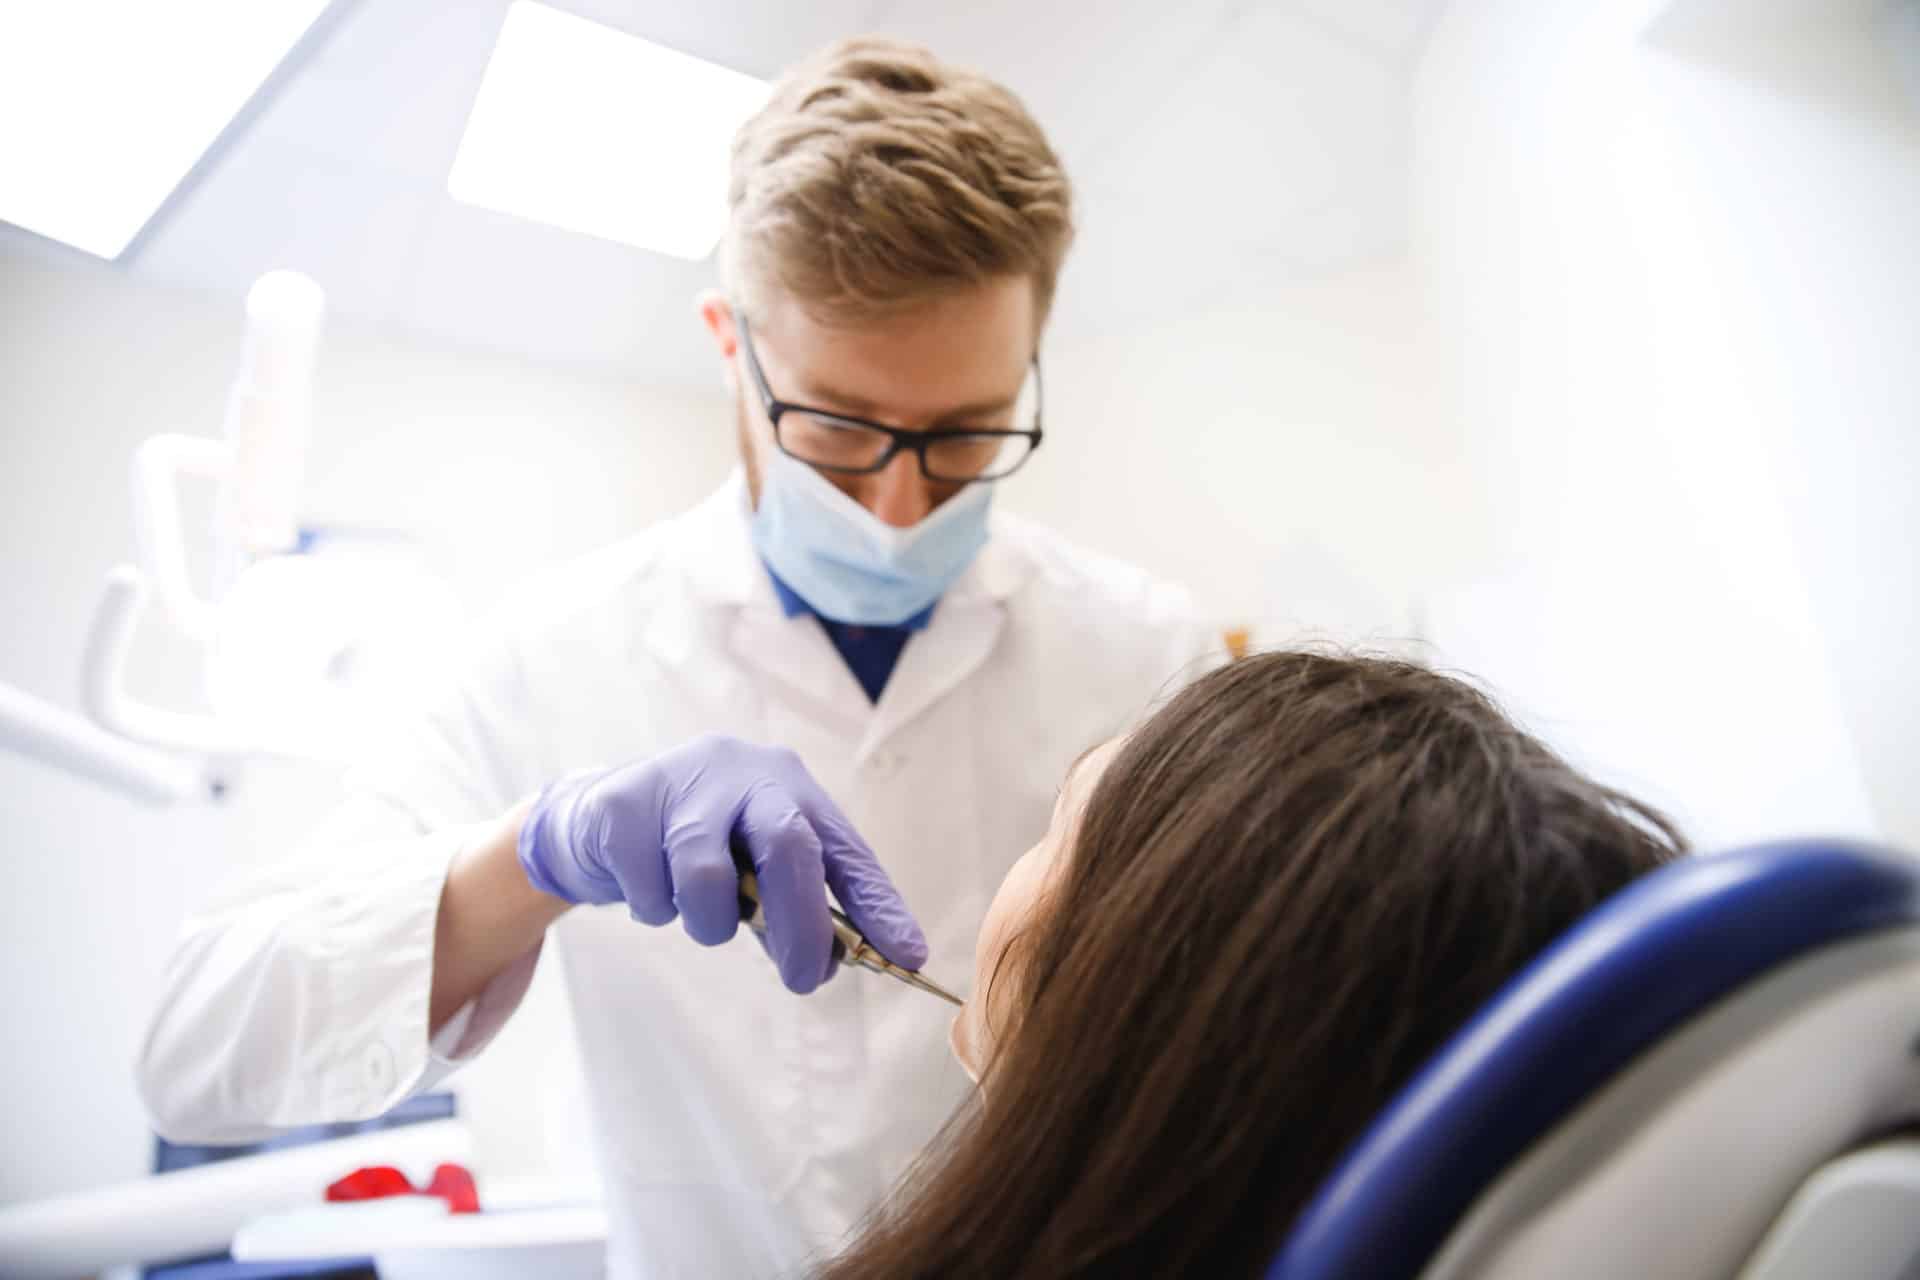 How to File a Dental Malpractice Suit